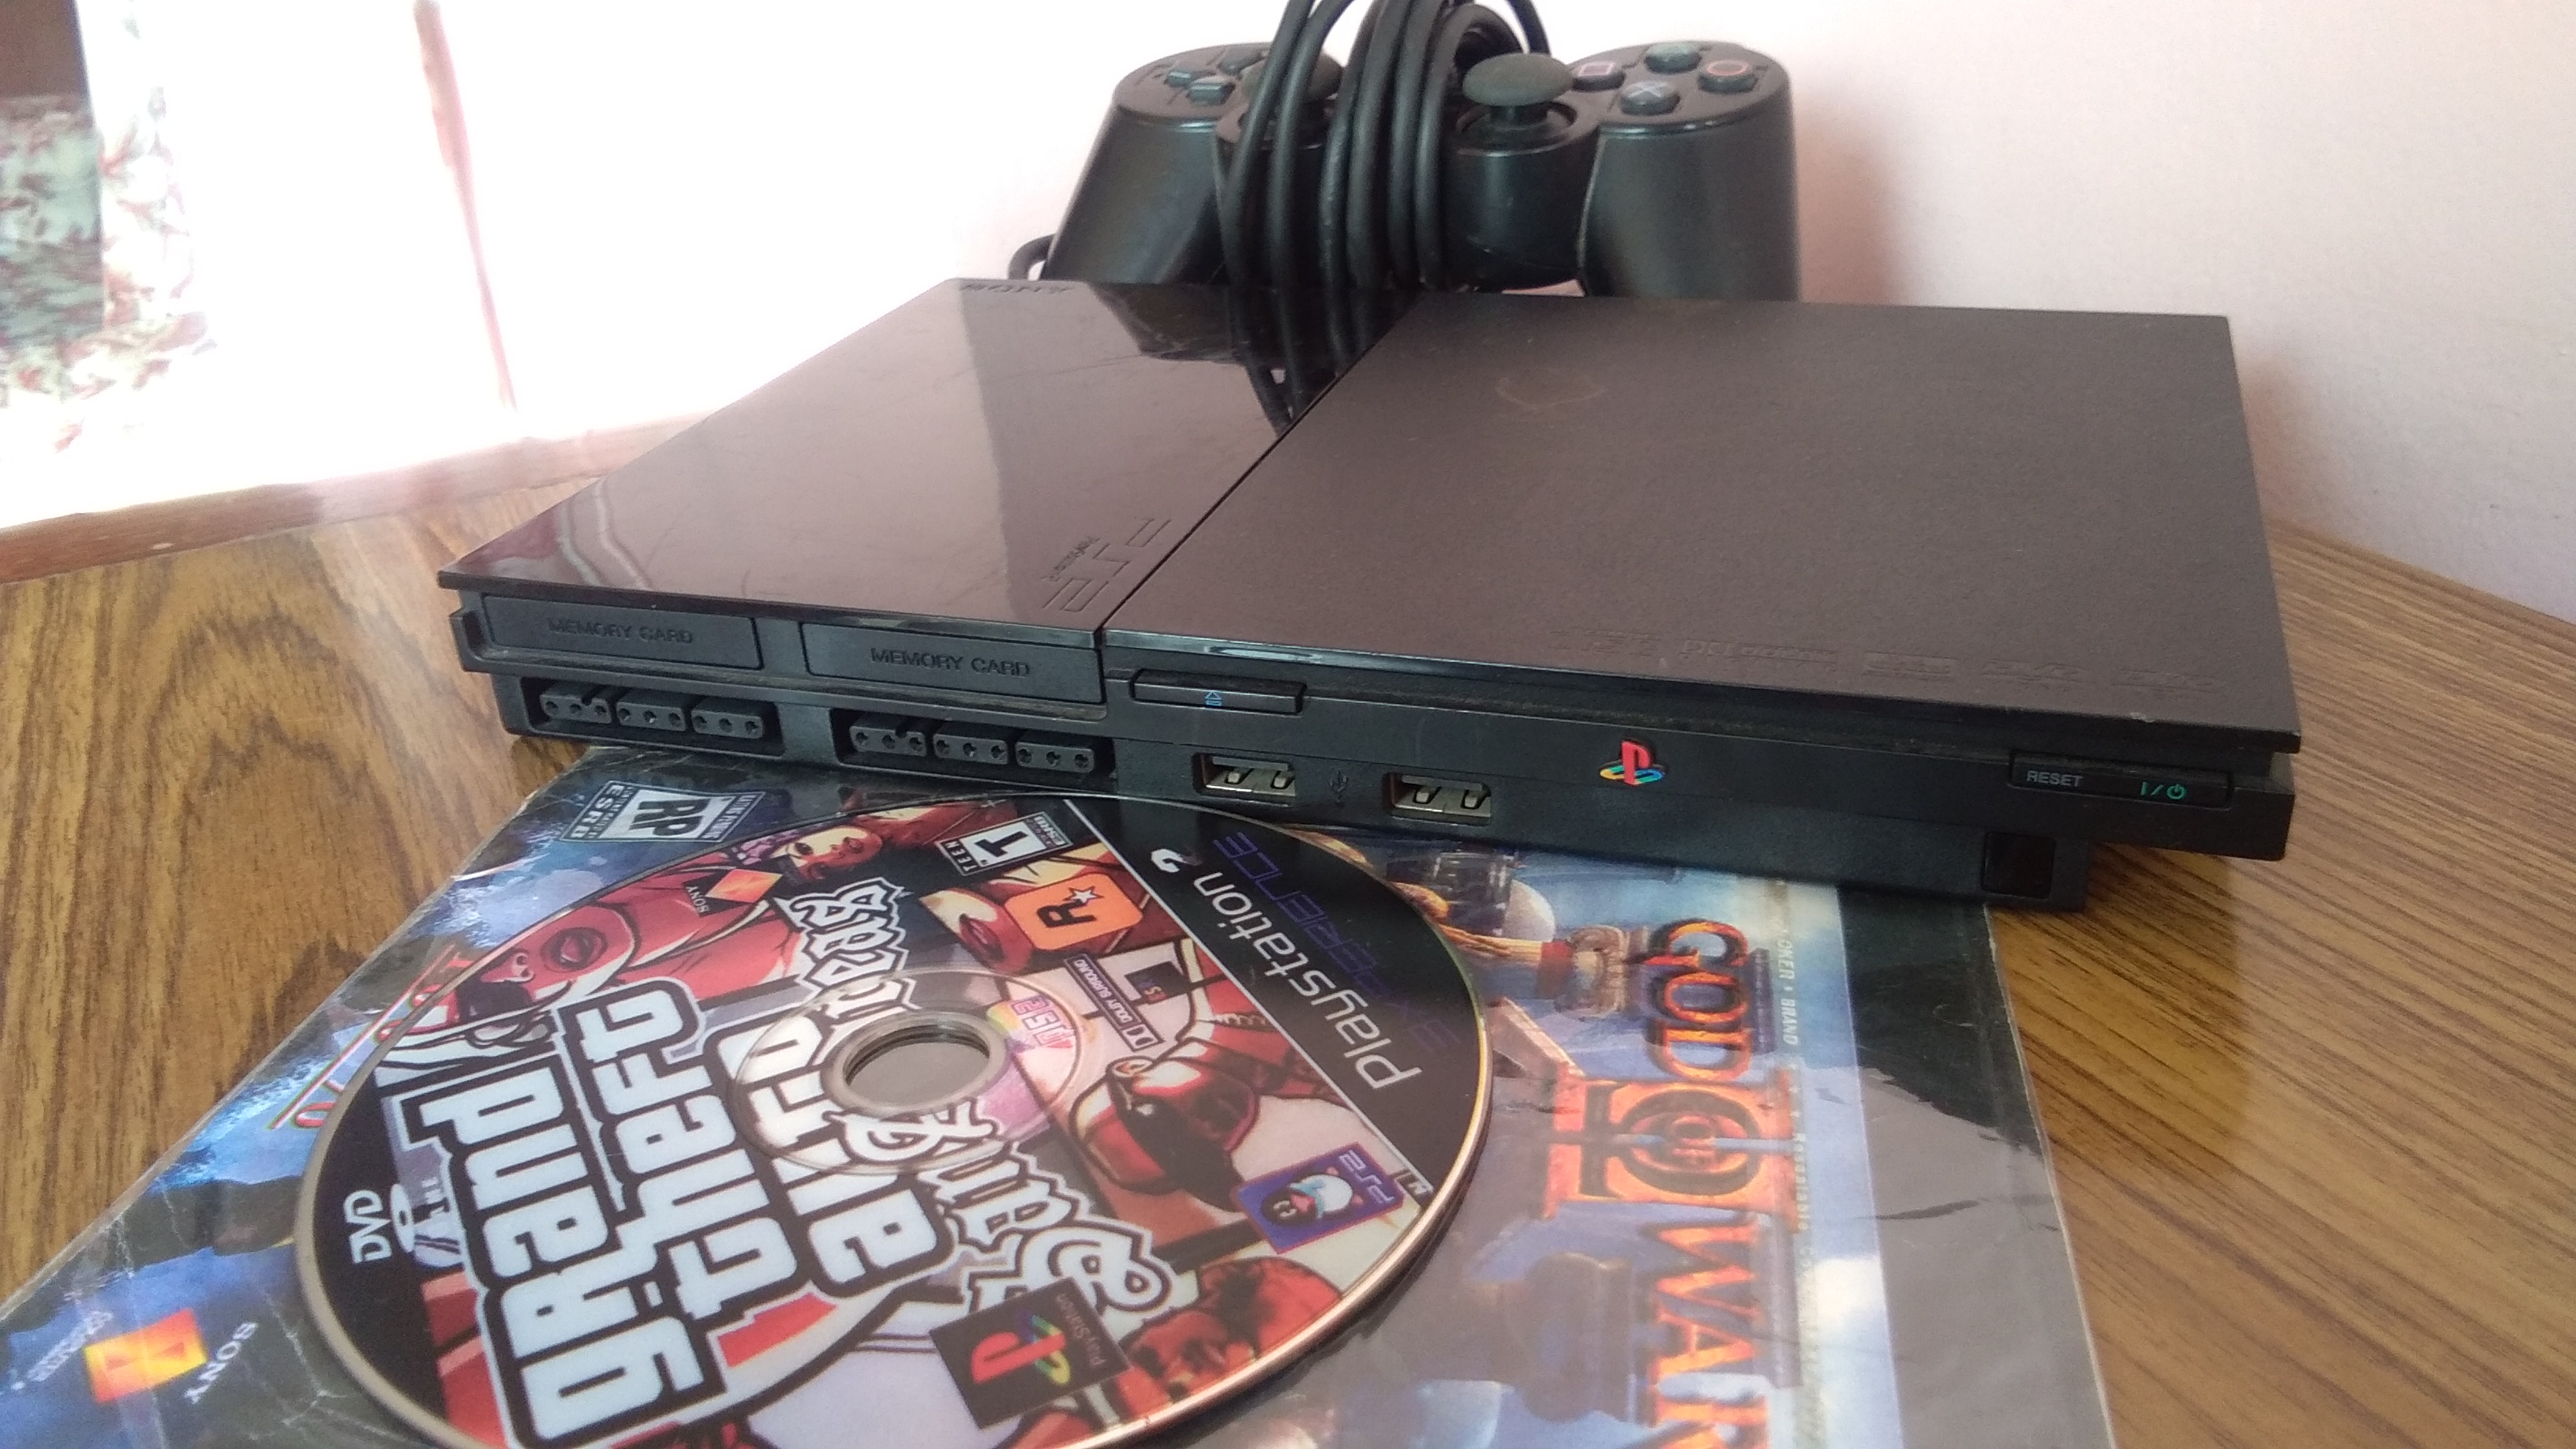 playstation 2 online shopping